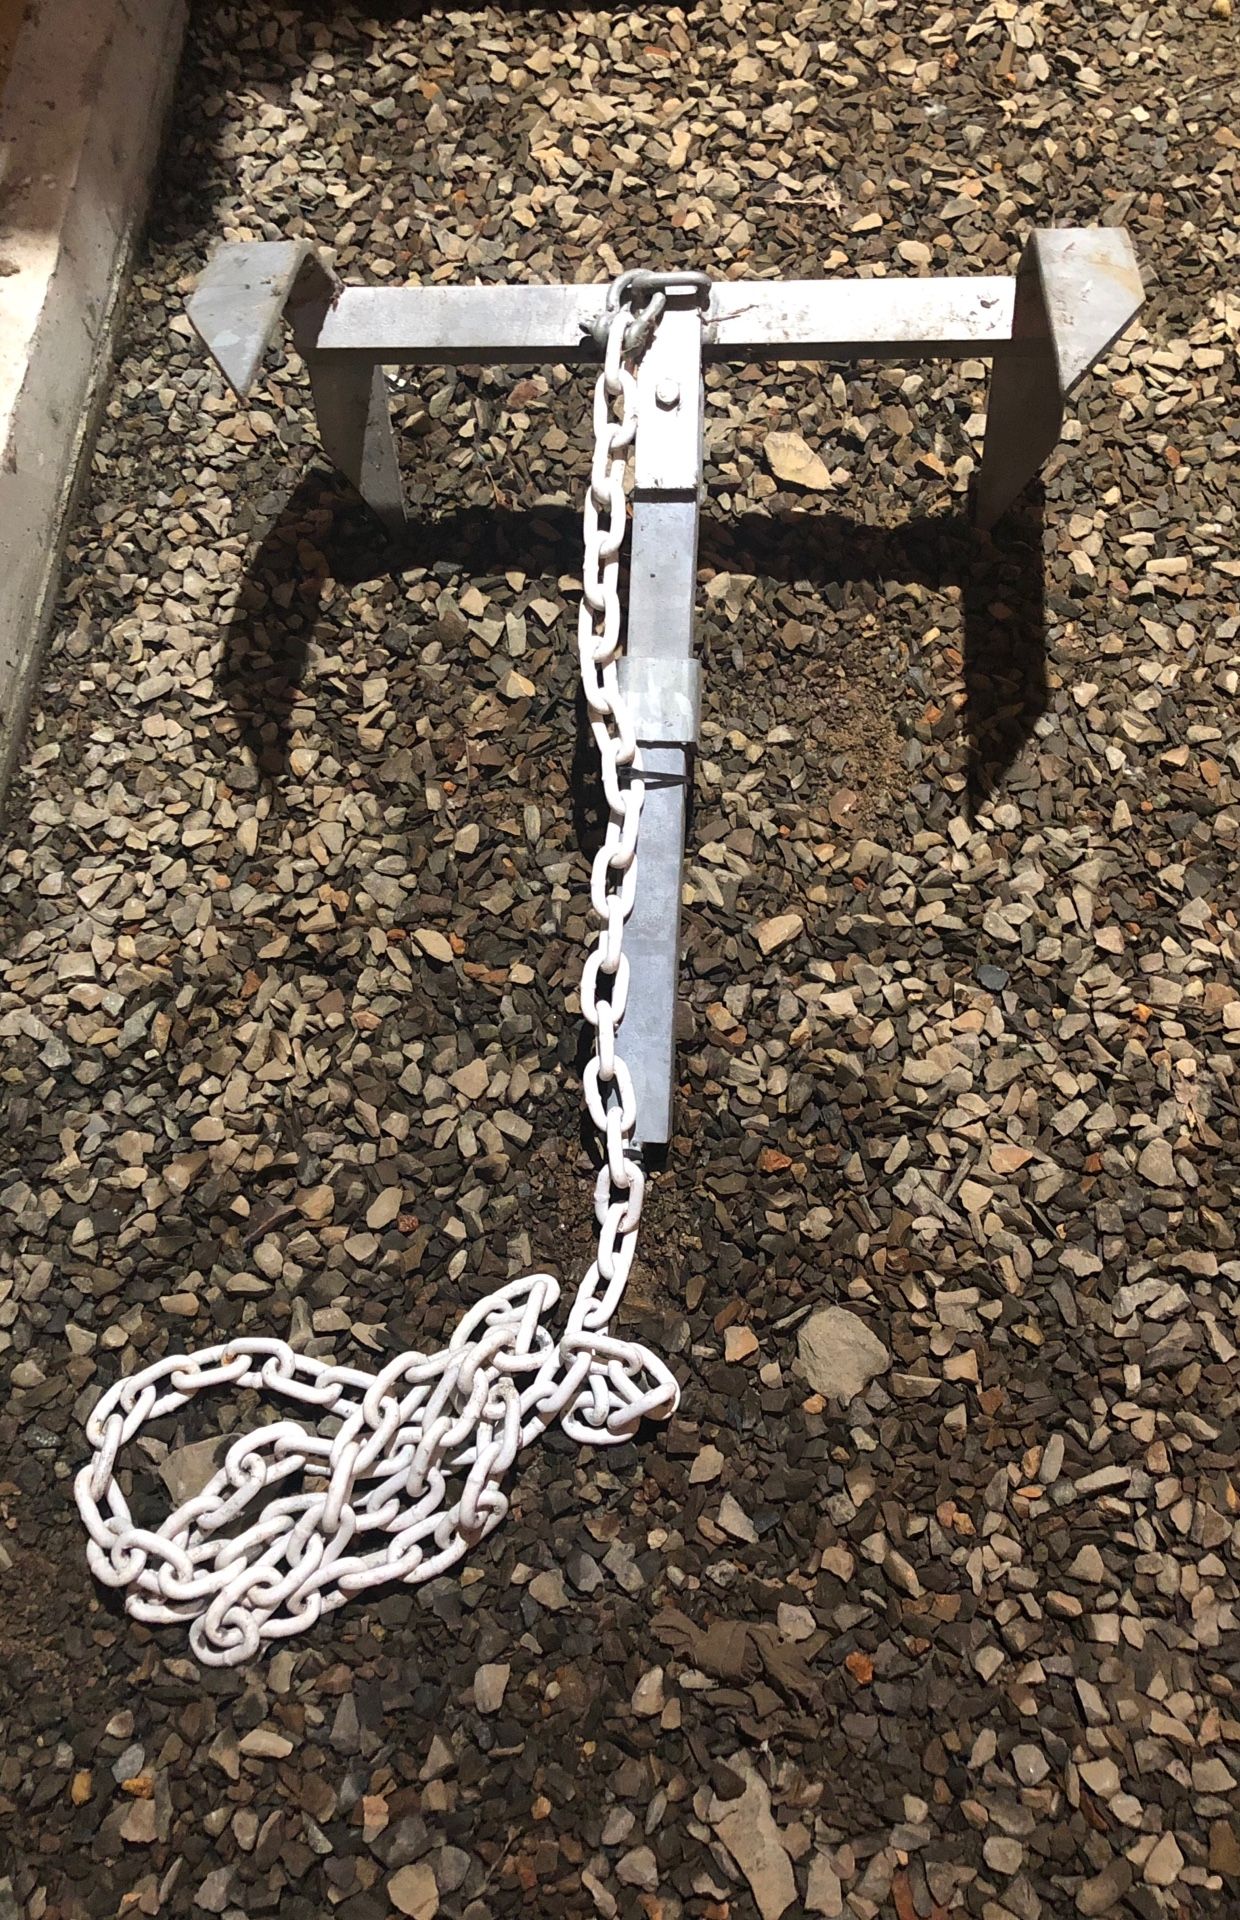 Columbia River Anchor. Still available. Messages got lost if you’ve sent any. Please resend.